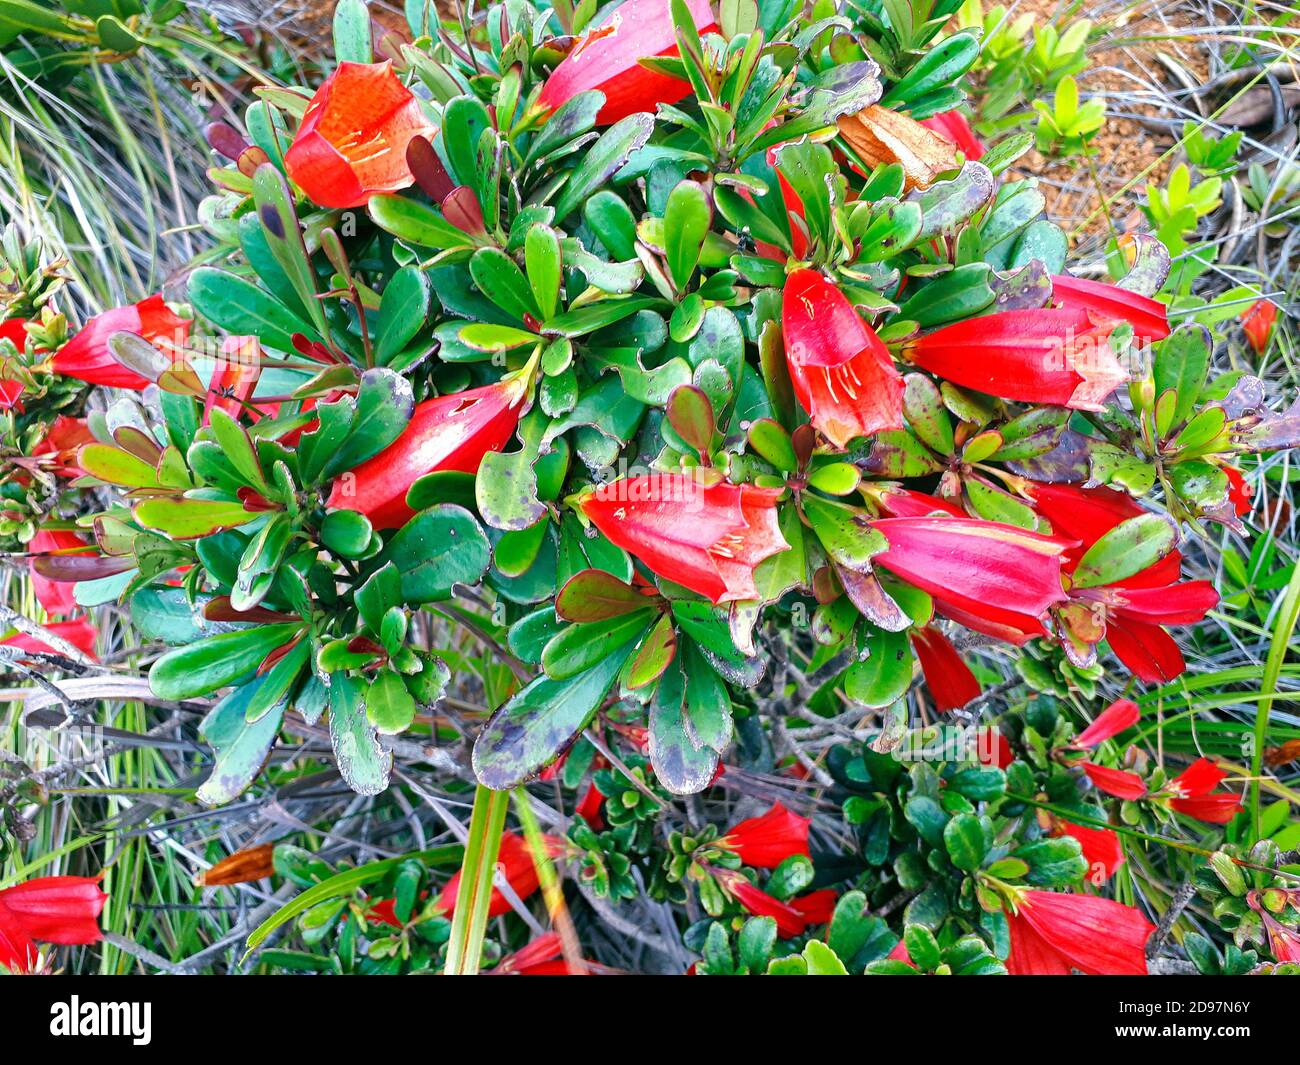 Thiollierea (Thiollierea campanulata) in bloom, Mont Dore, Rubiacea endemic to New Caledonia Stock Photo